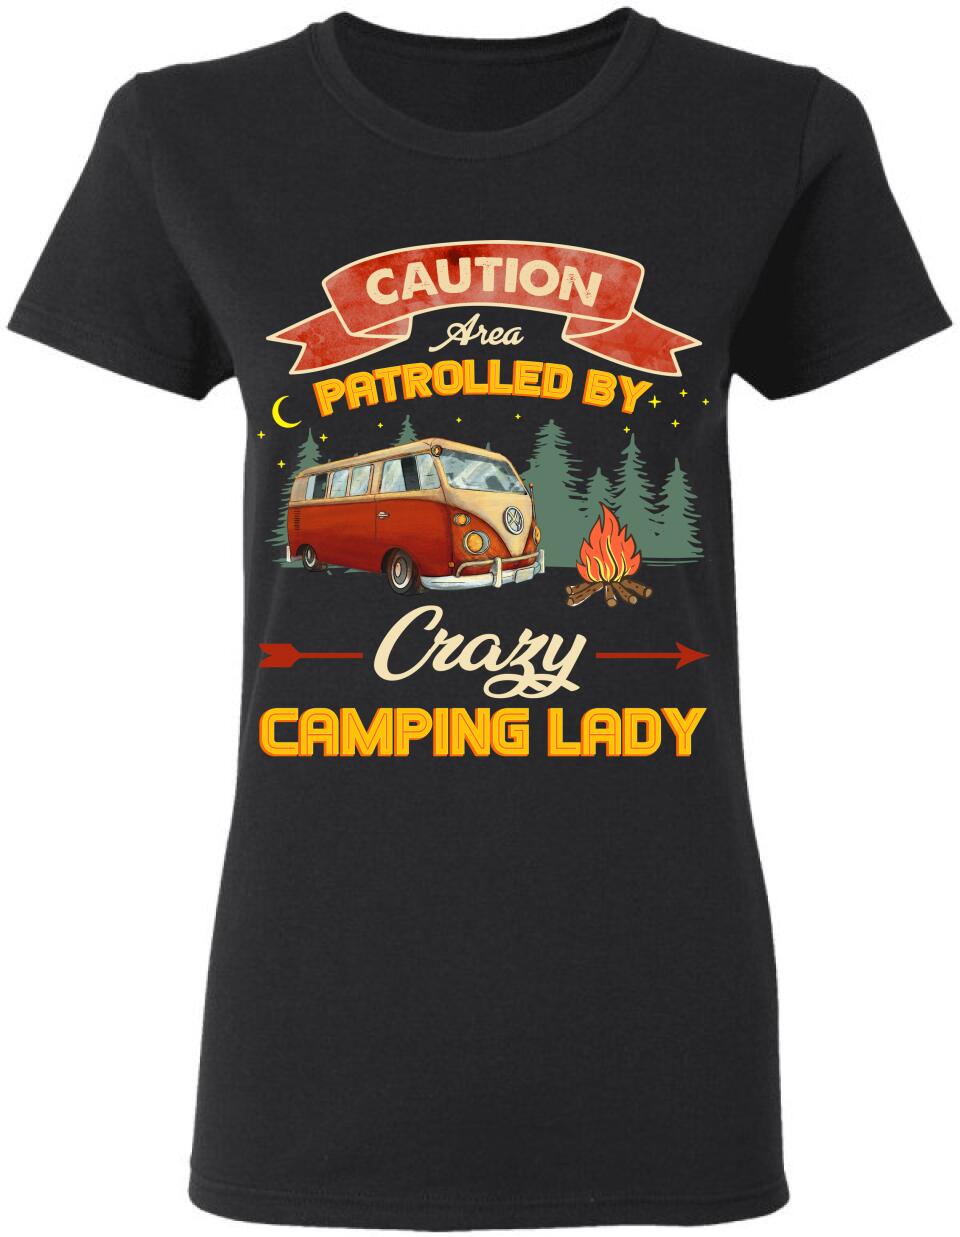 Caution Area Patrolled by Crazy Camping Lady - Ladies T-shirt